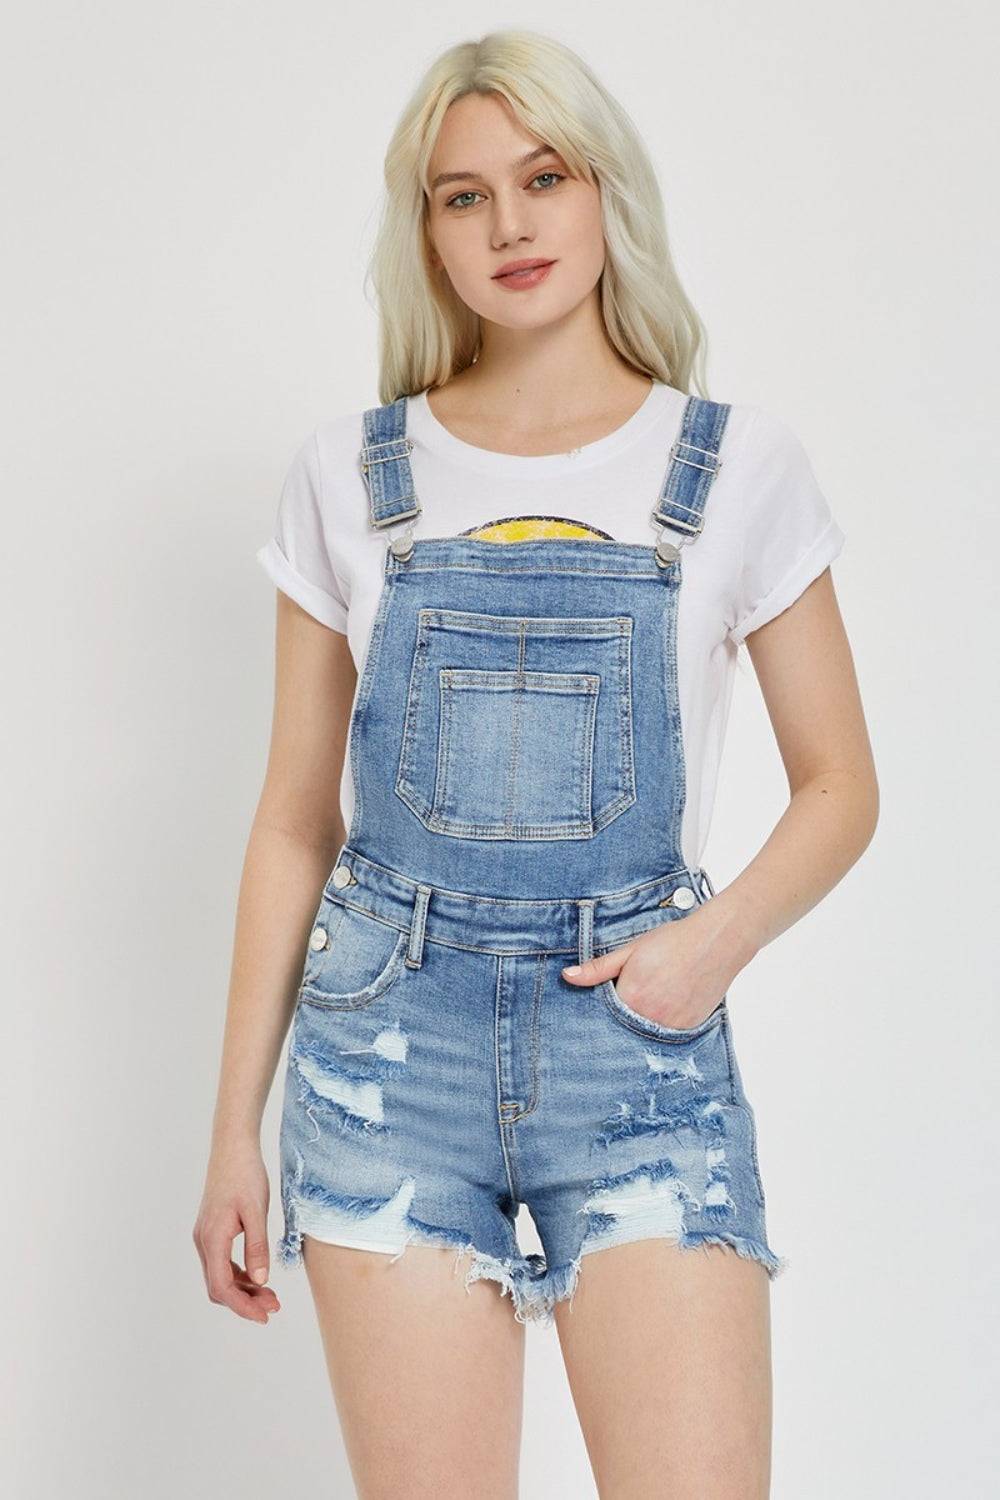 a woman in a white shirt and denim overalls